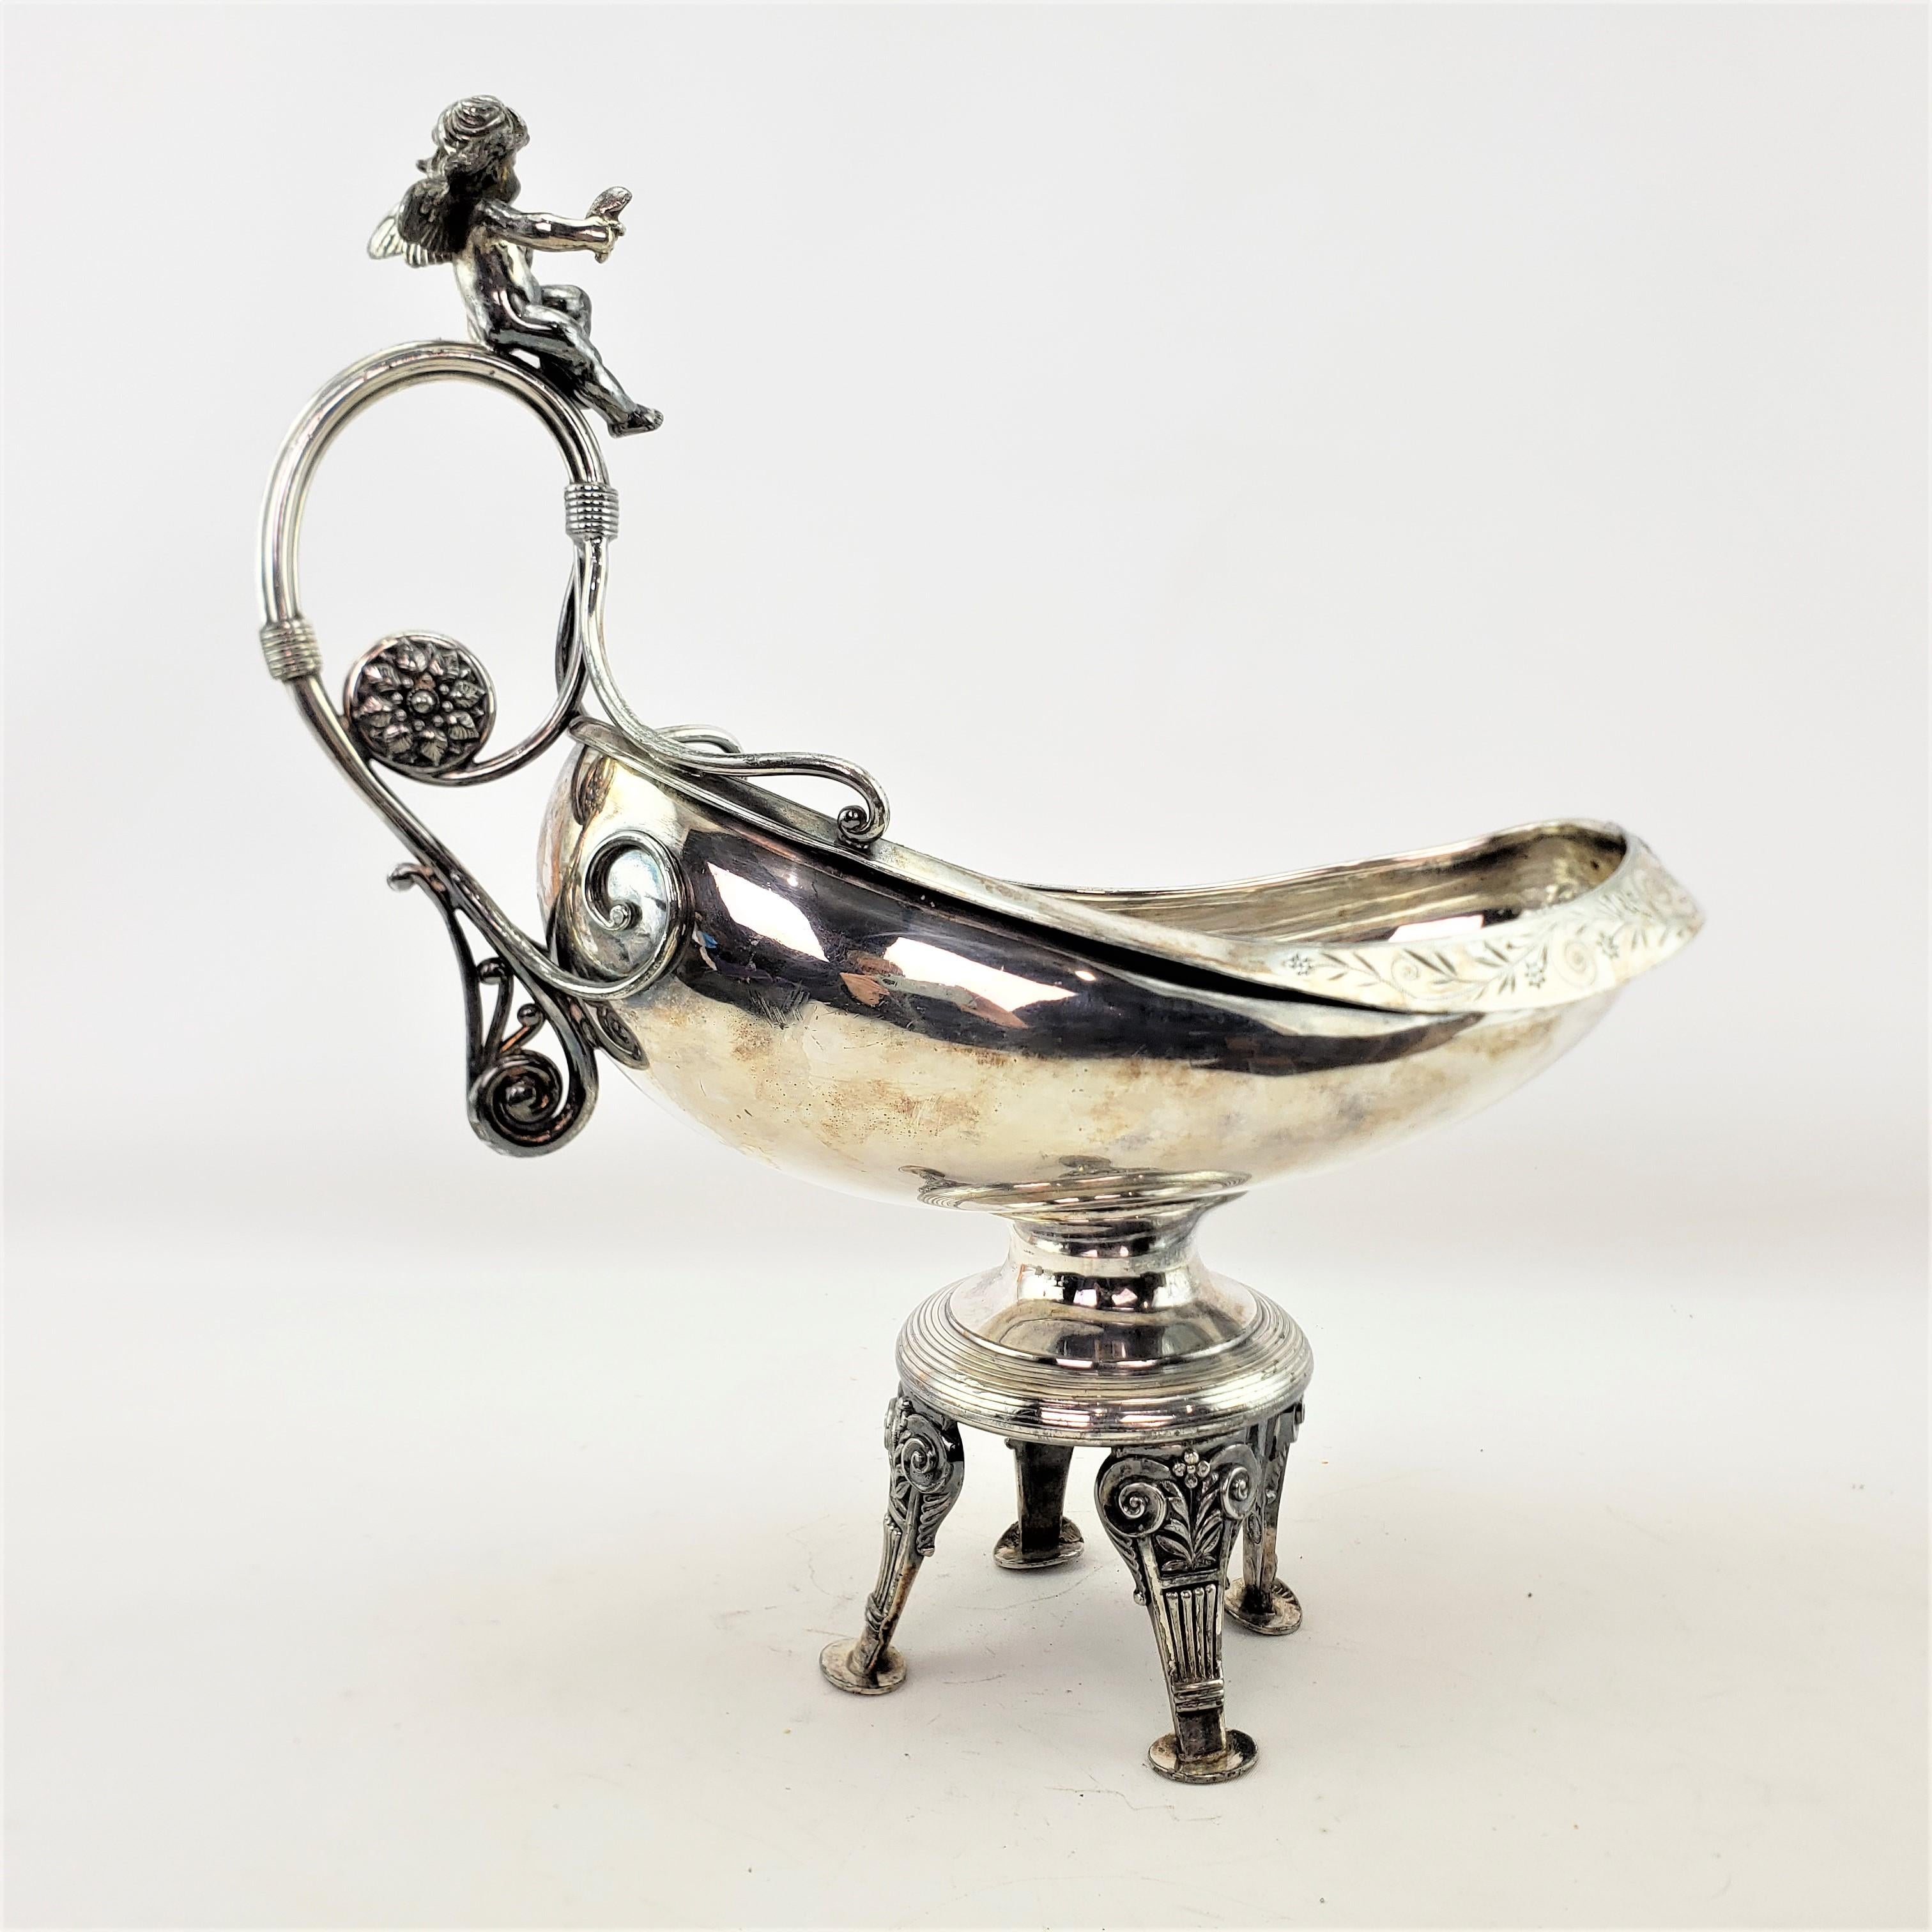 Antique Silver Plated Centerpiece Bowl with Figural Cherub & Floral Engraving In Good Condition For Sale In Hamilton, Ontario